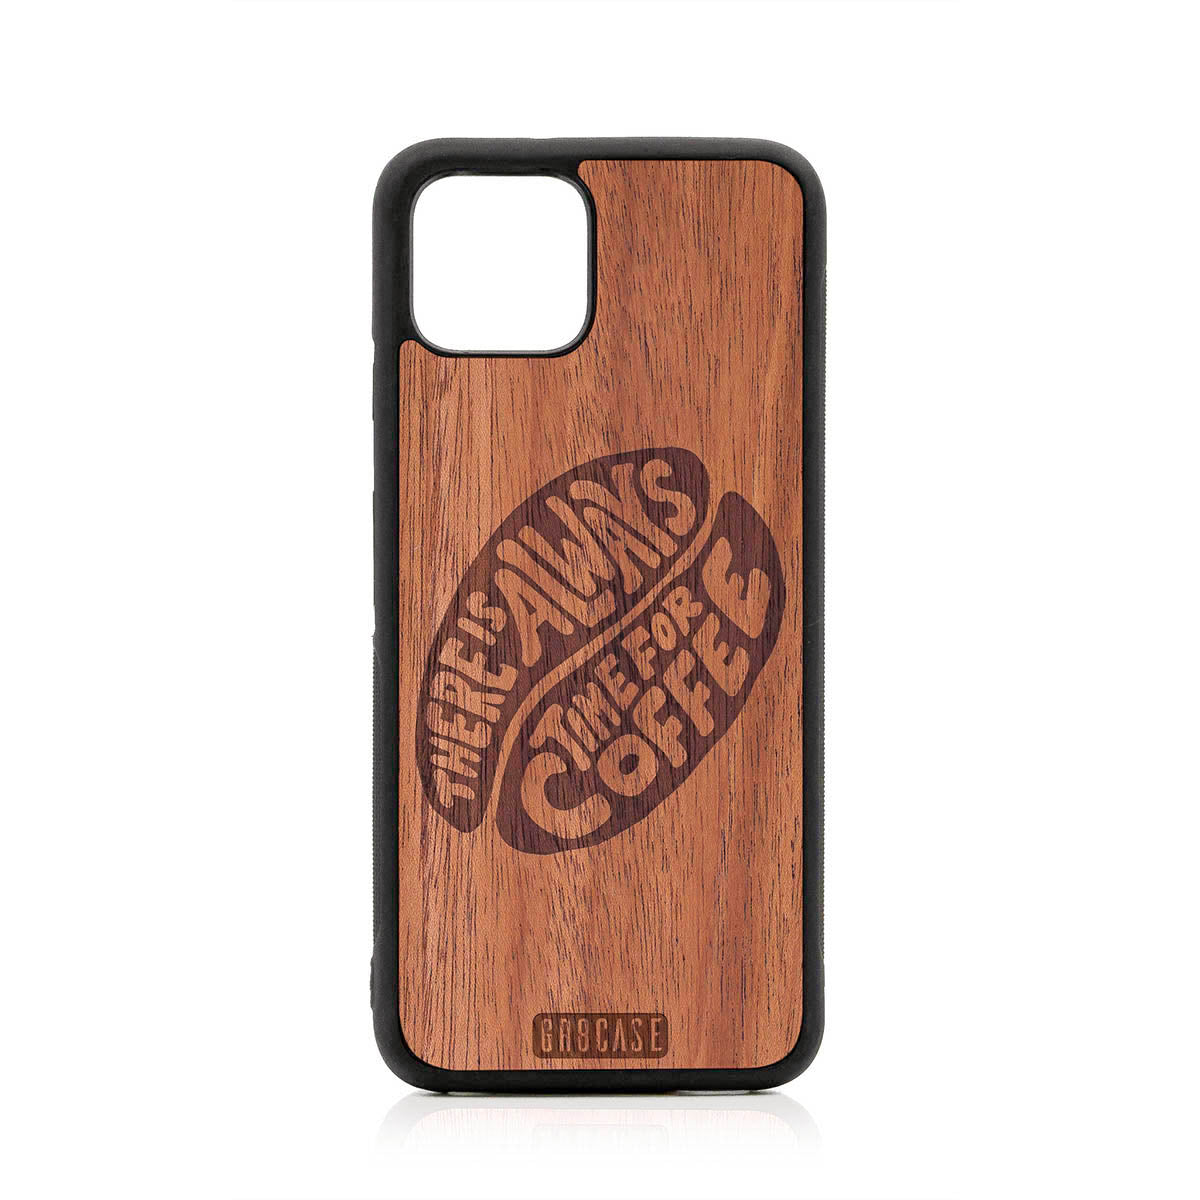 There Is Always Time For Coffee Design Wood Case For Google Pixel 4